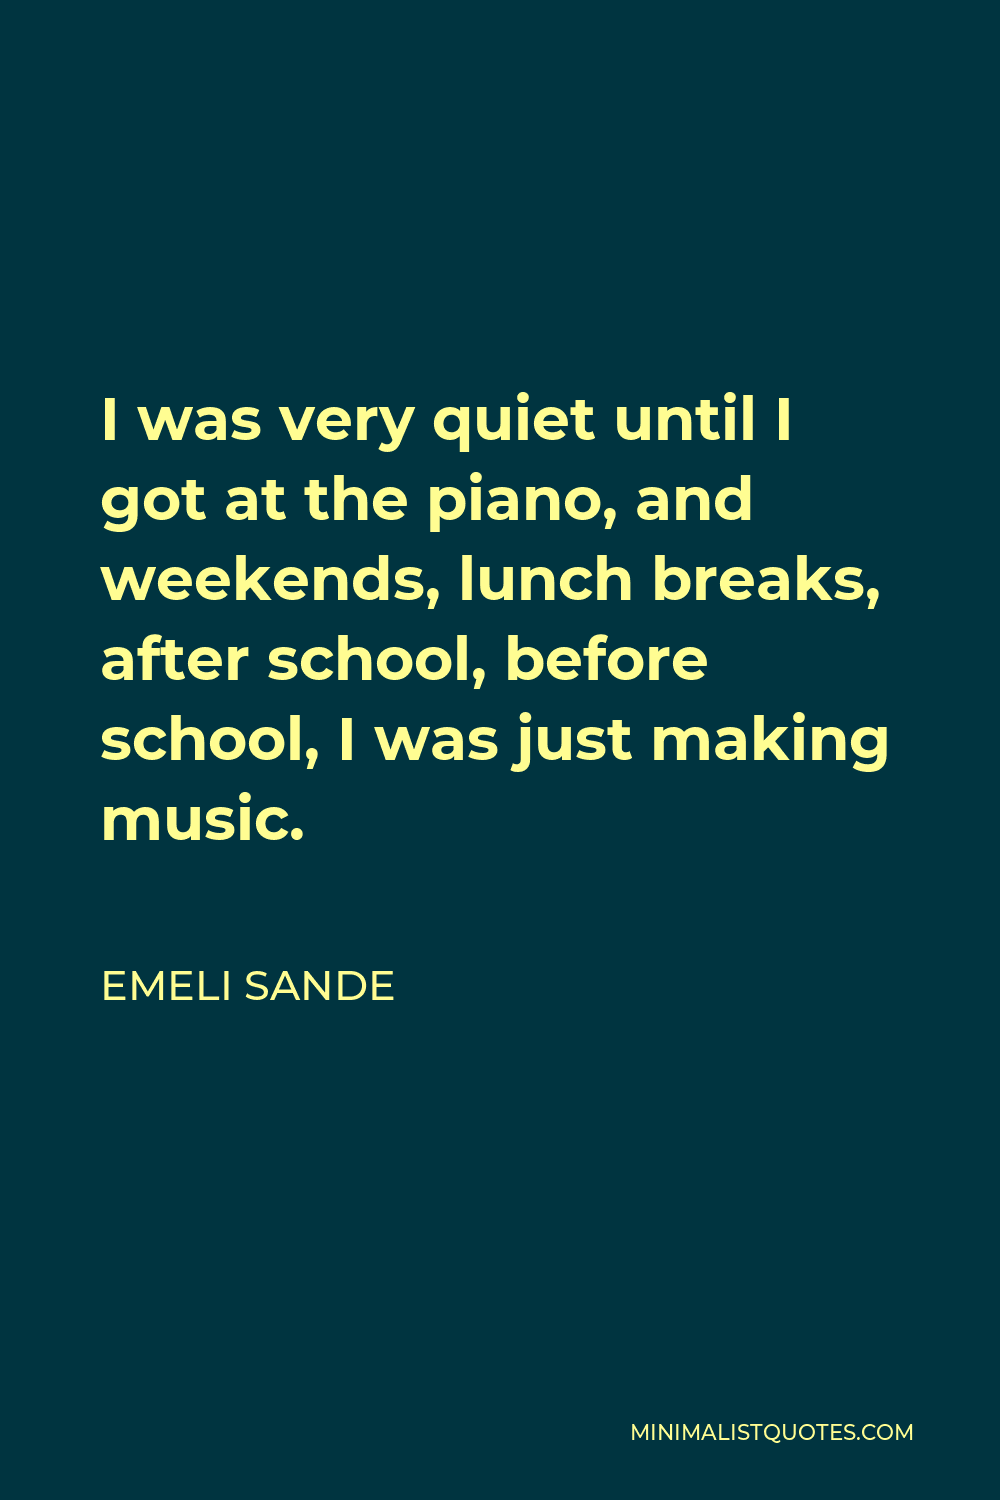 Emeli Sande Quote - I was very quiet until I got at the piano, and weekends, lunch breaks, after school, before school, I was just making music.